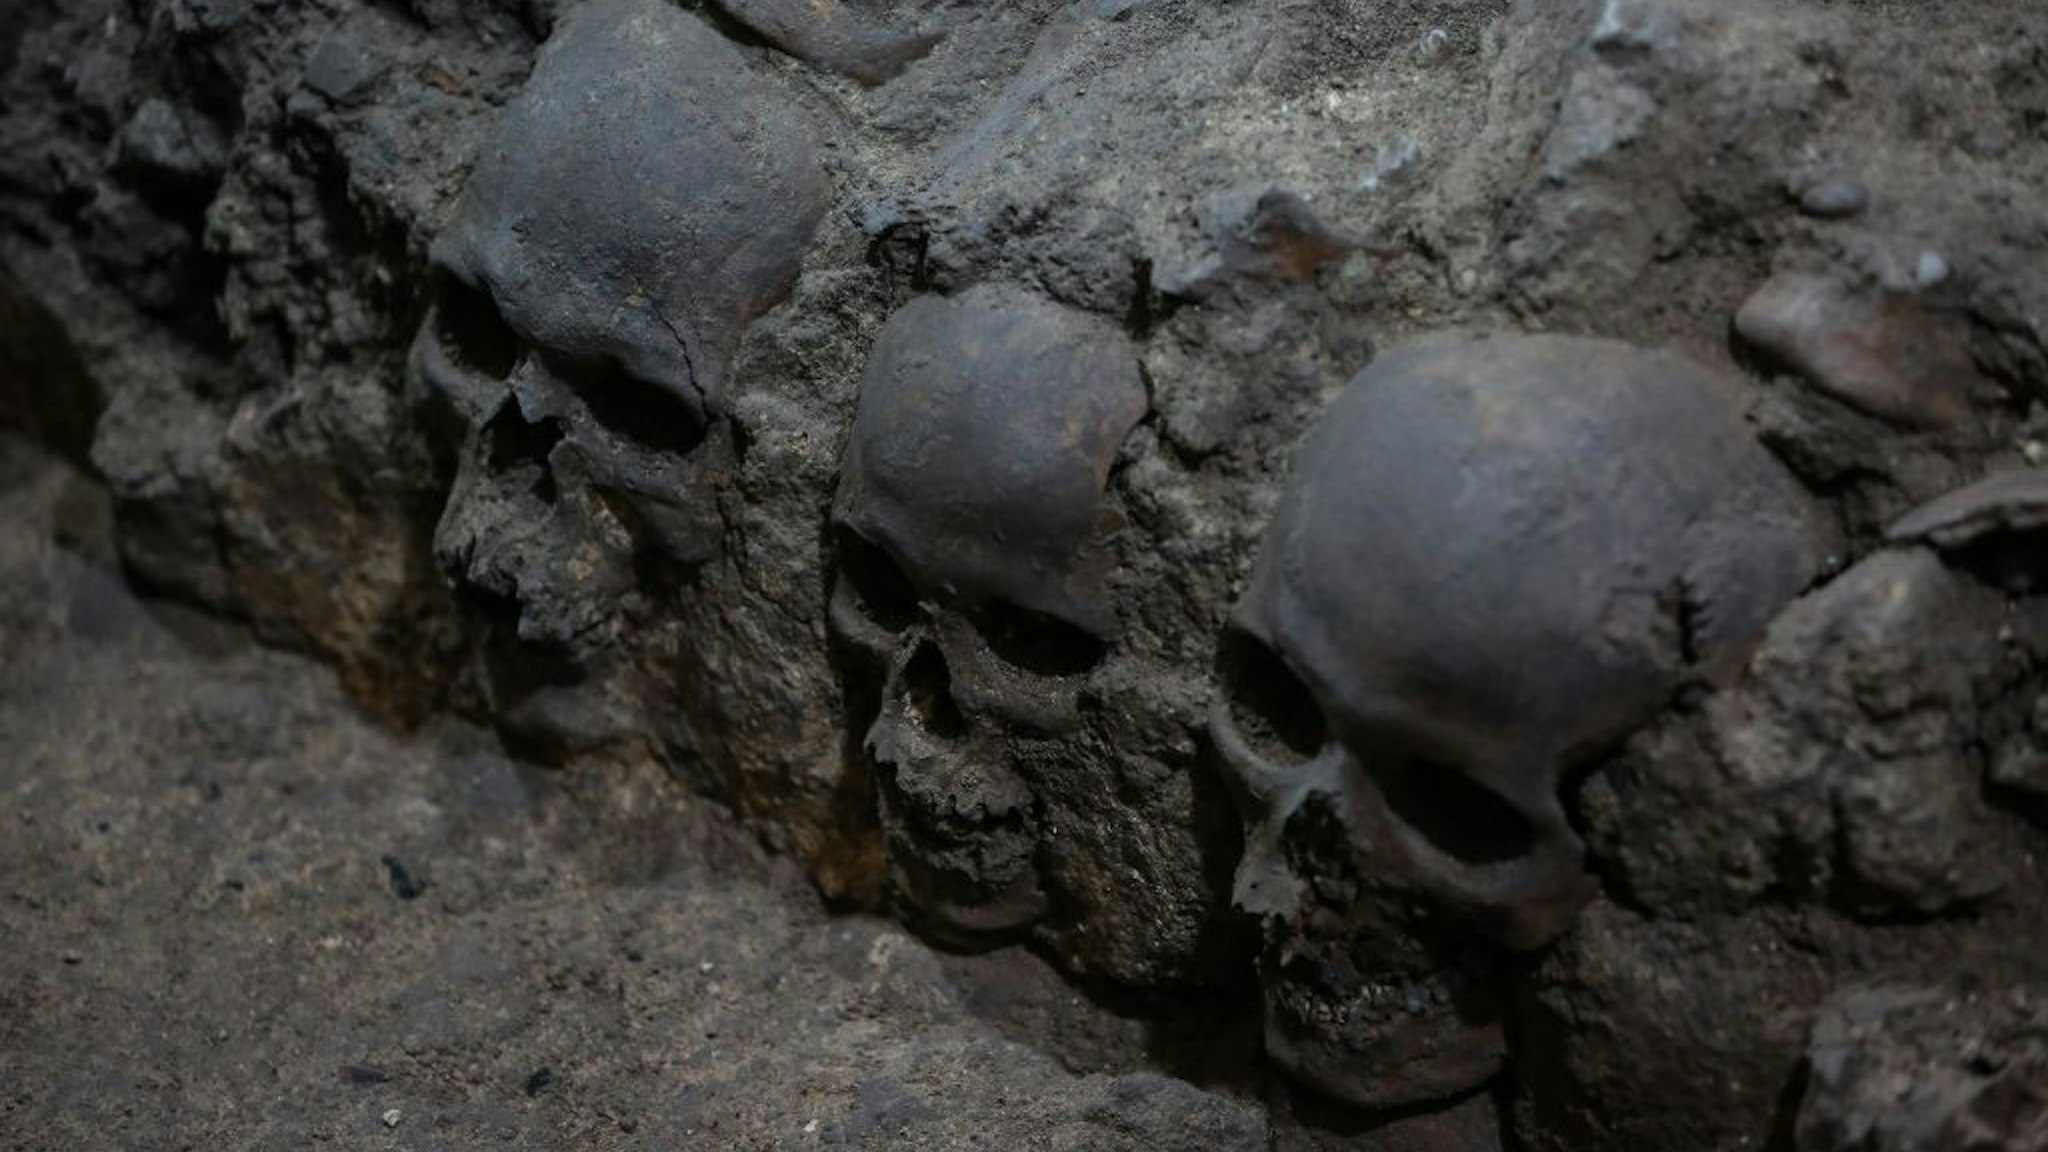 MEXICO CITY, MEXICO - JULY 10: Skulls, which were found during an excavation work, are seen within a cylindrical edifice in Mexico City, Mexico on July 10, 2017. More than 650 skulls and thousands of fragments were found near Templo Mayor, one of the main temples in the Aztec capital Tenochtitlan, which later became Mexico City. The discovery has raised new questions about the culture of sacrifice in the Aztec Empire.